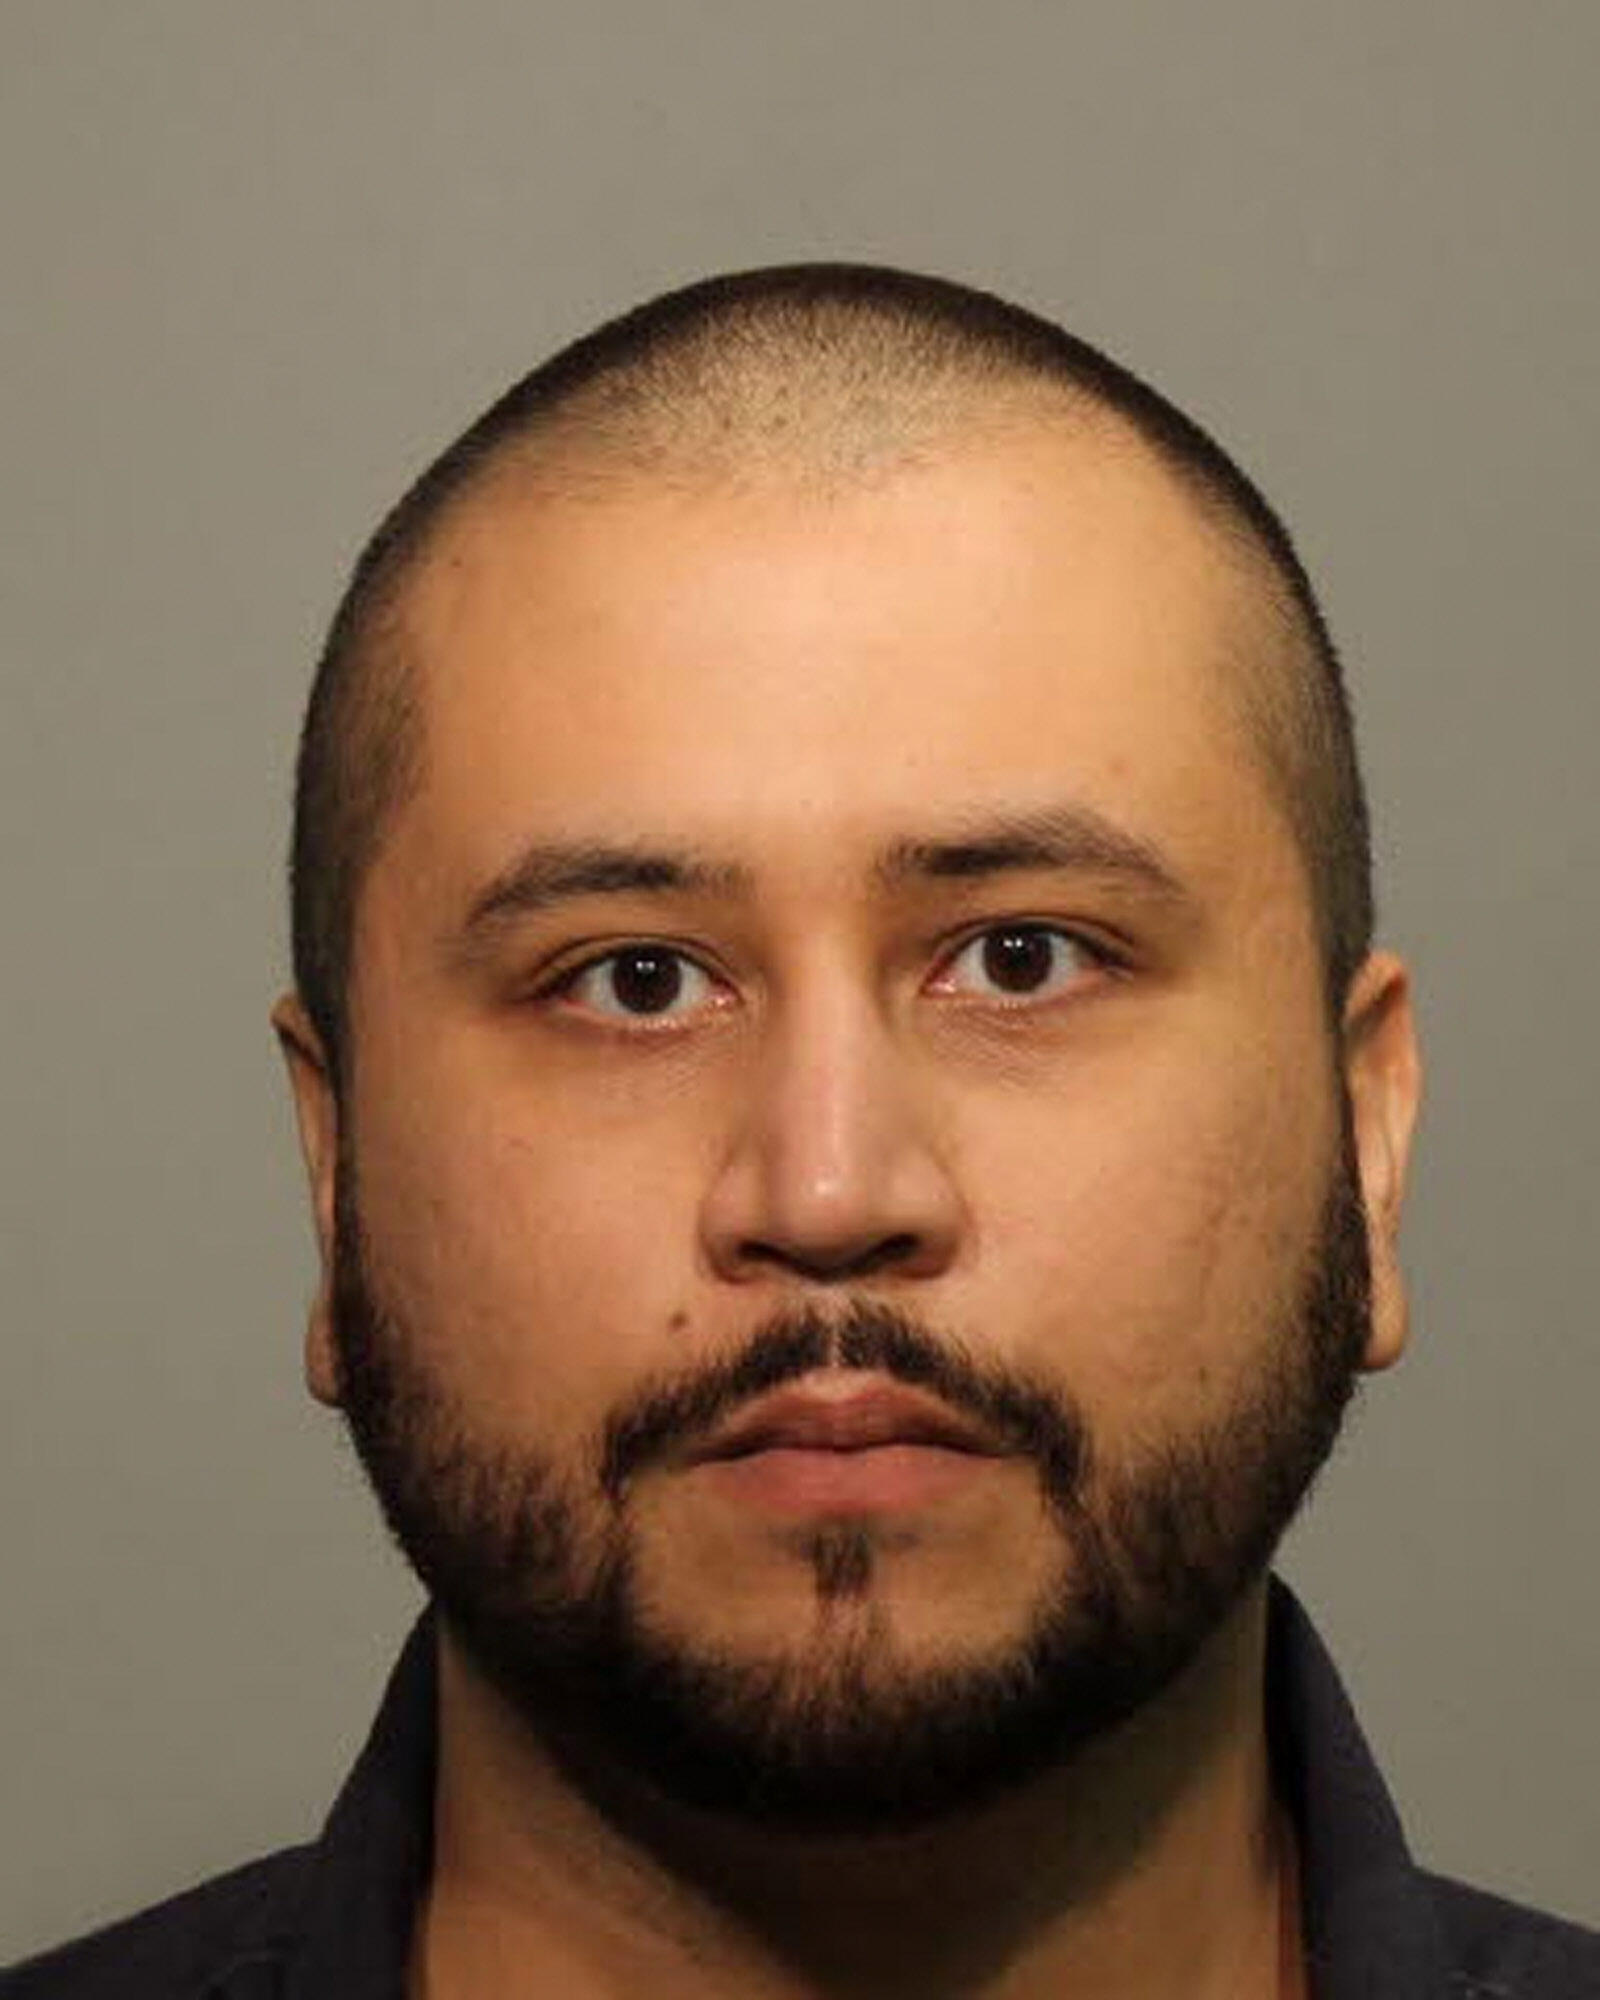 Private Investigator Seeks Protection Order Against George Zimmerman - Thumbnail Image